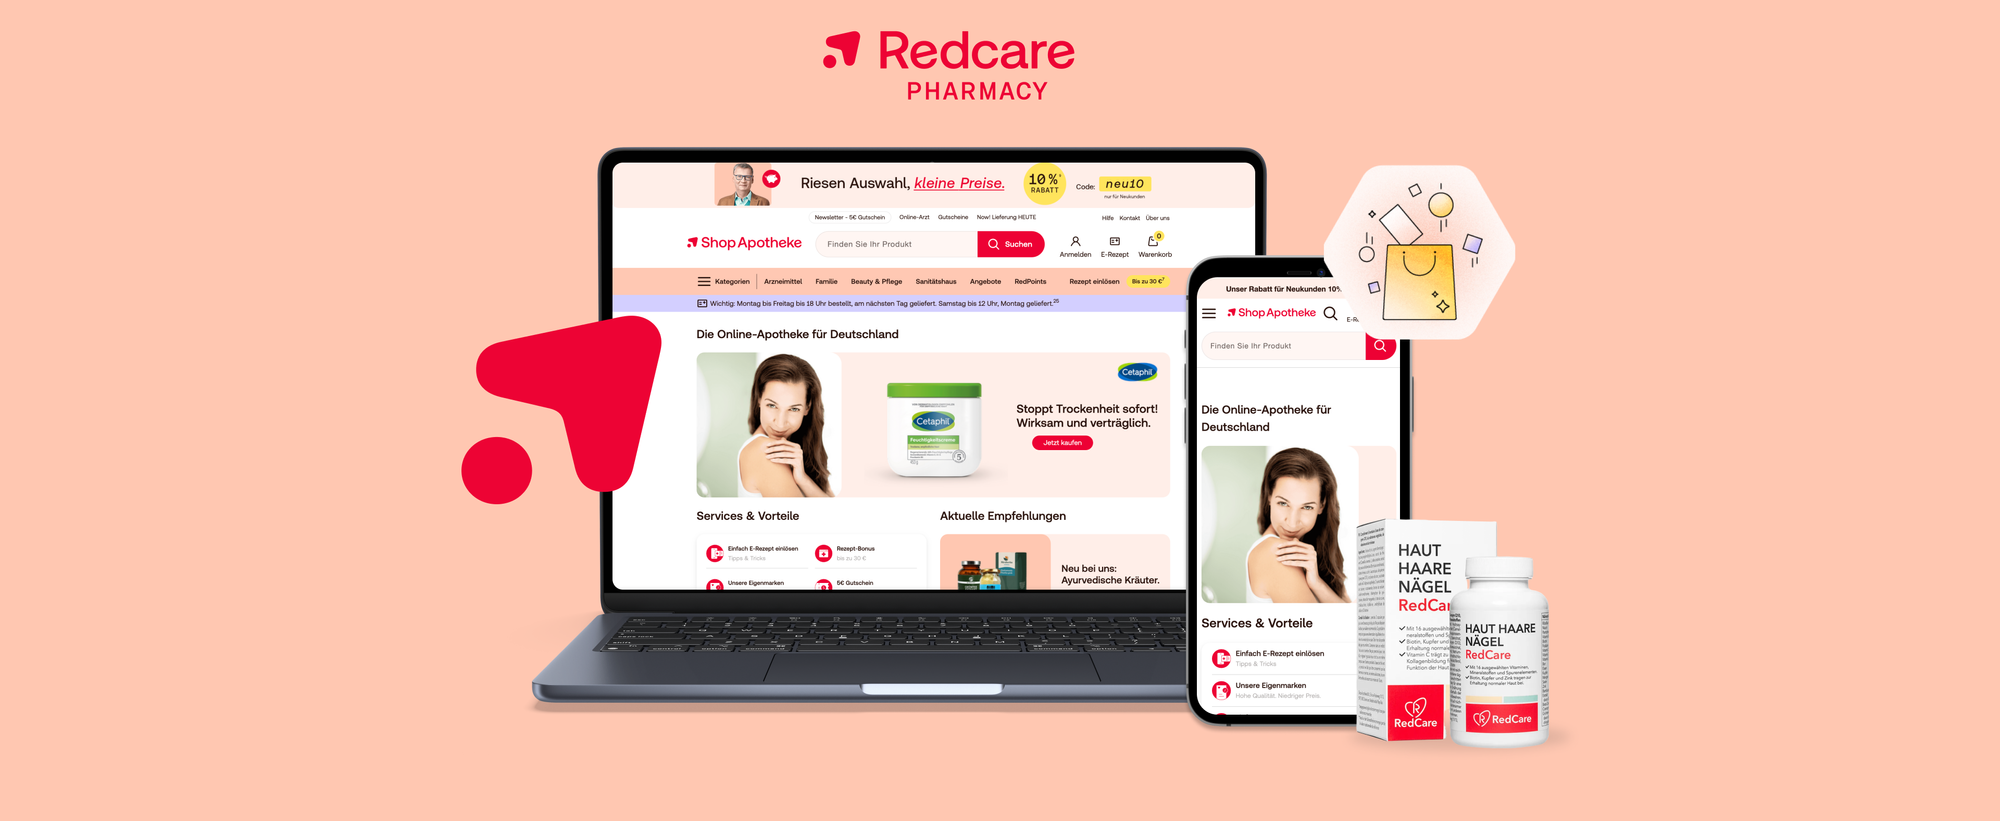 Redcare Pharmacy (Shopapotheke) - Transforming their e-commerce shops into a new world